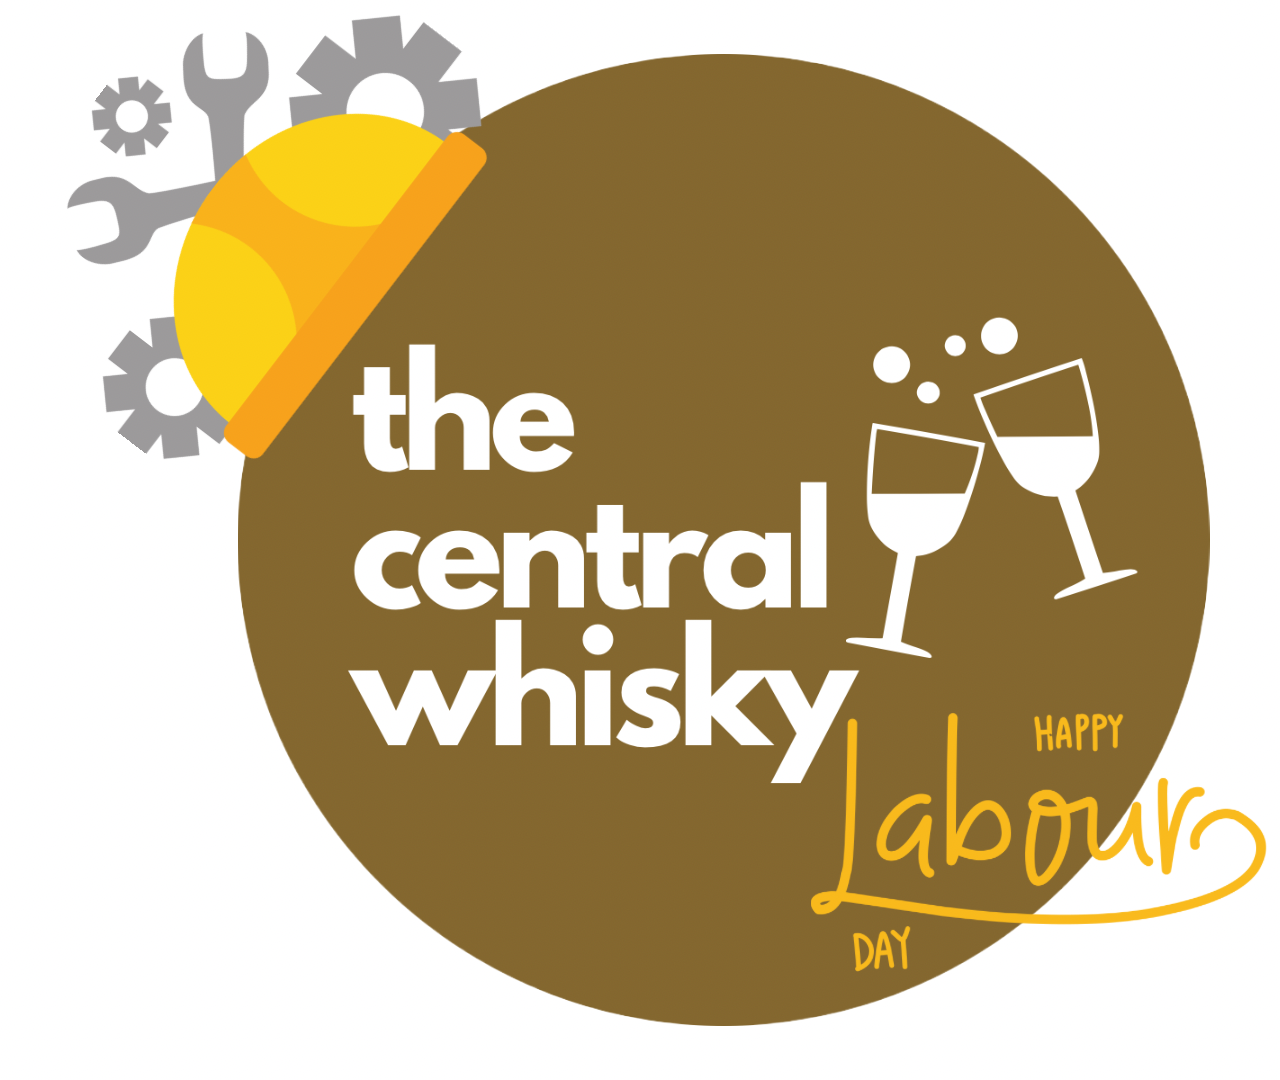 The Central Whisky